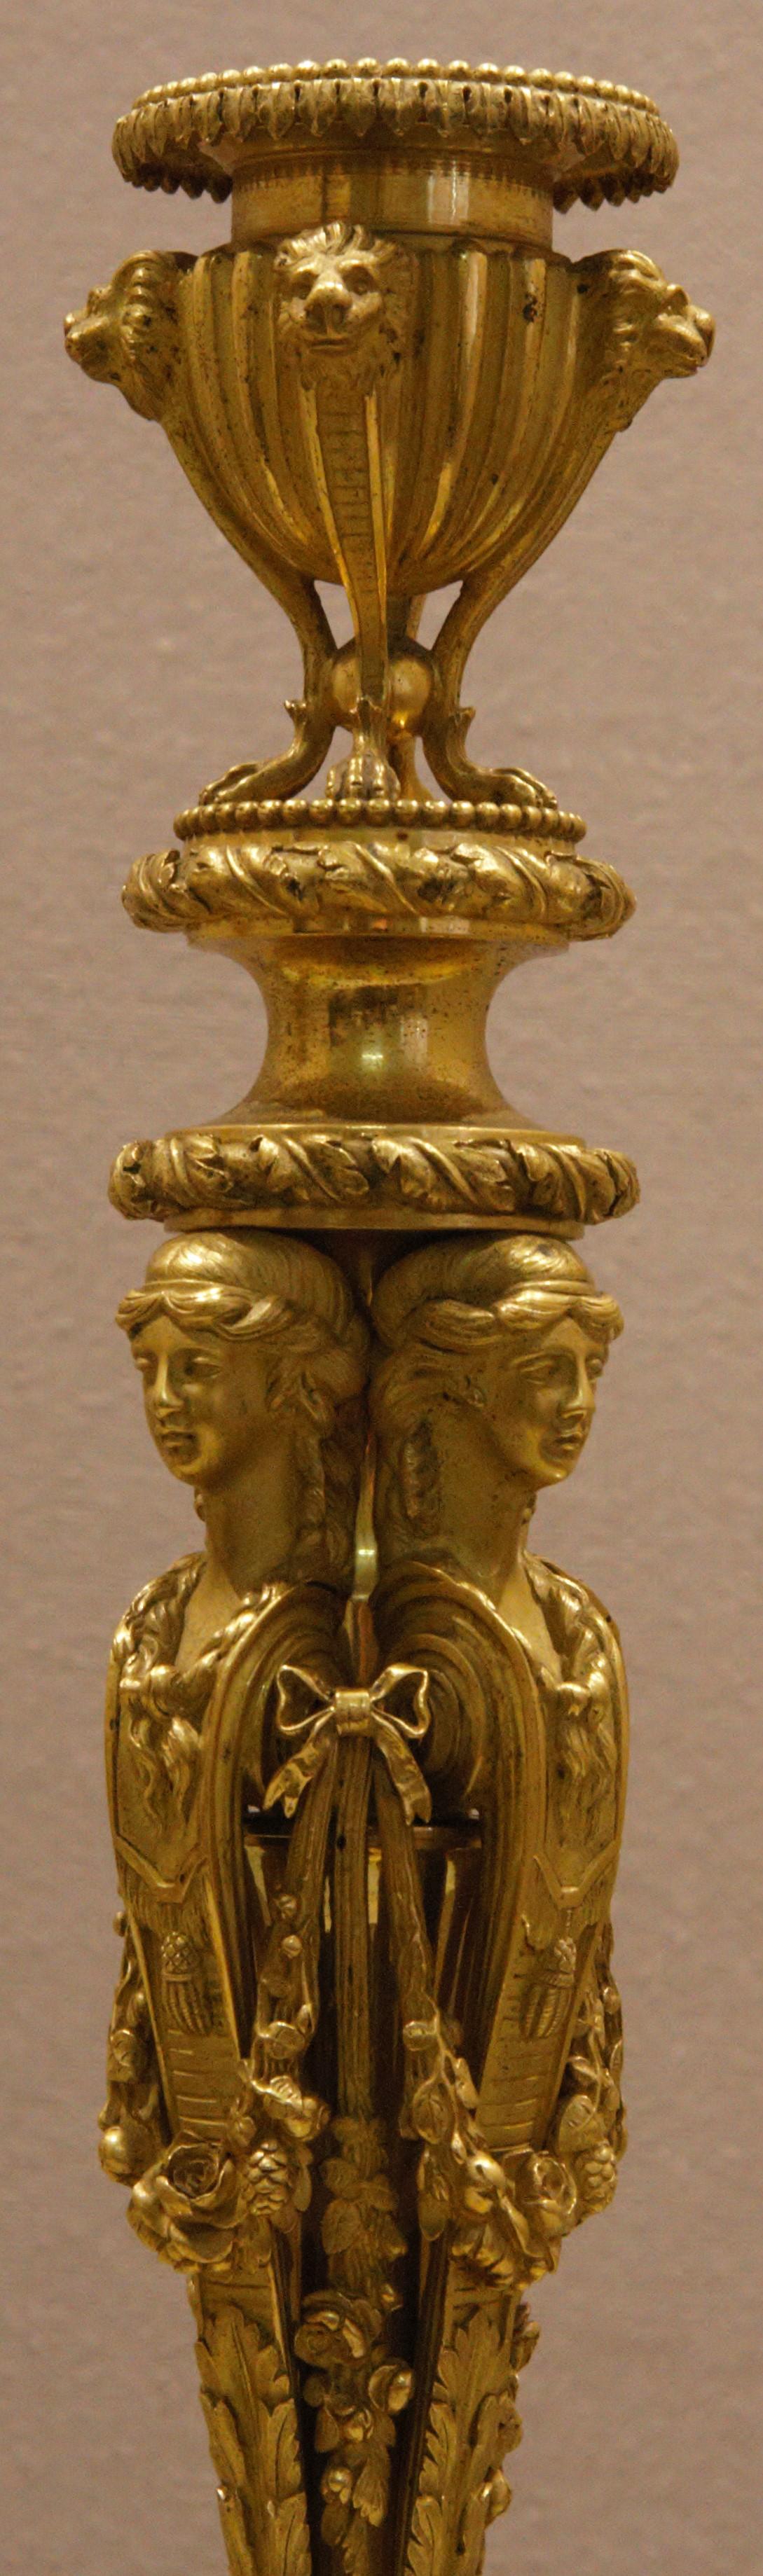 These candlesticks after design by Jean-Démonsthène Dugourc, circa 1830.
Each with addorsed female caryatids stem surmounted with stiff-leaf-cast urn-shaped nozzle and on acanthus cast domed socle and circular fluted plinth.